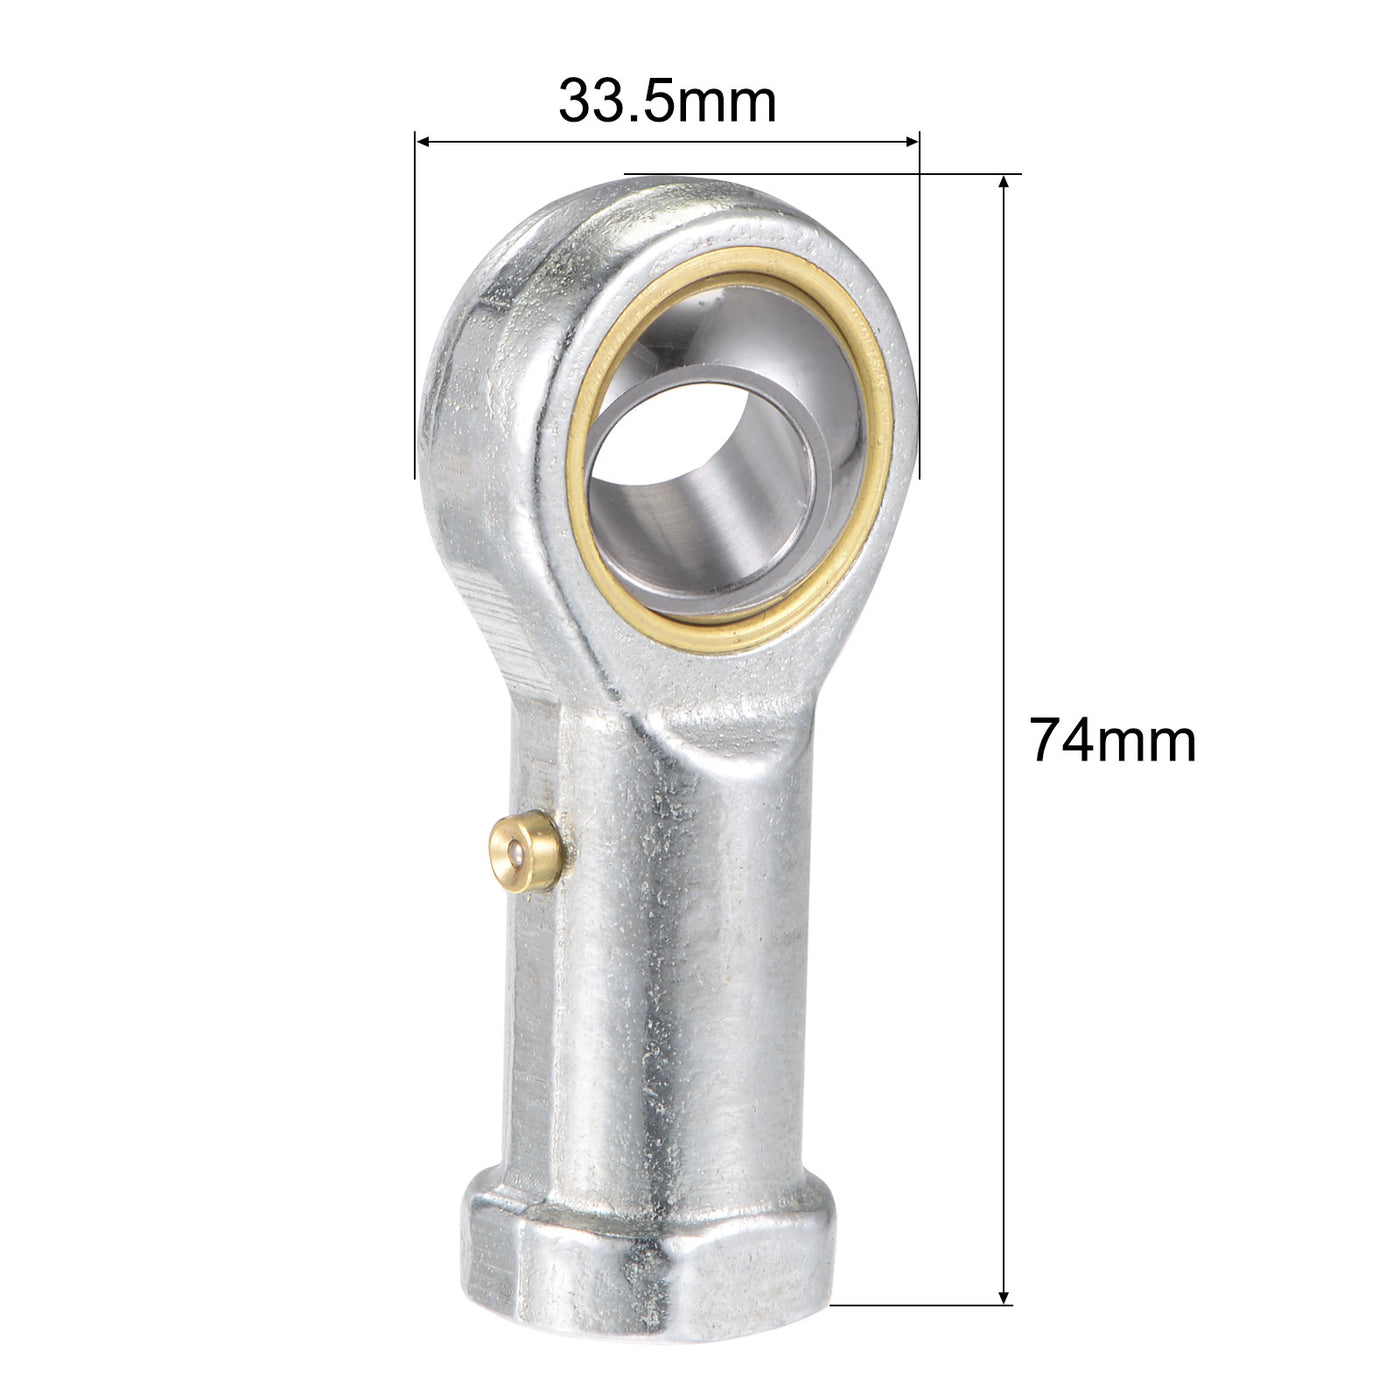 uxcell Uxcell PHS14 Rod End Bearing 14mm Bore Self-lubricated M14x2.0 Right Hand Female Thread